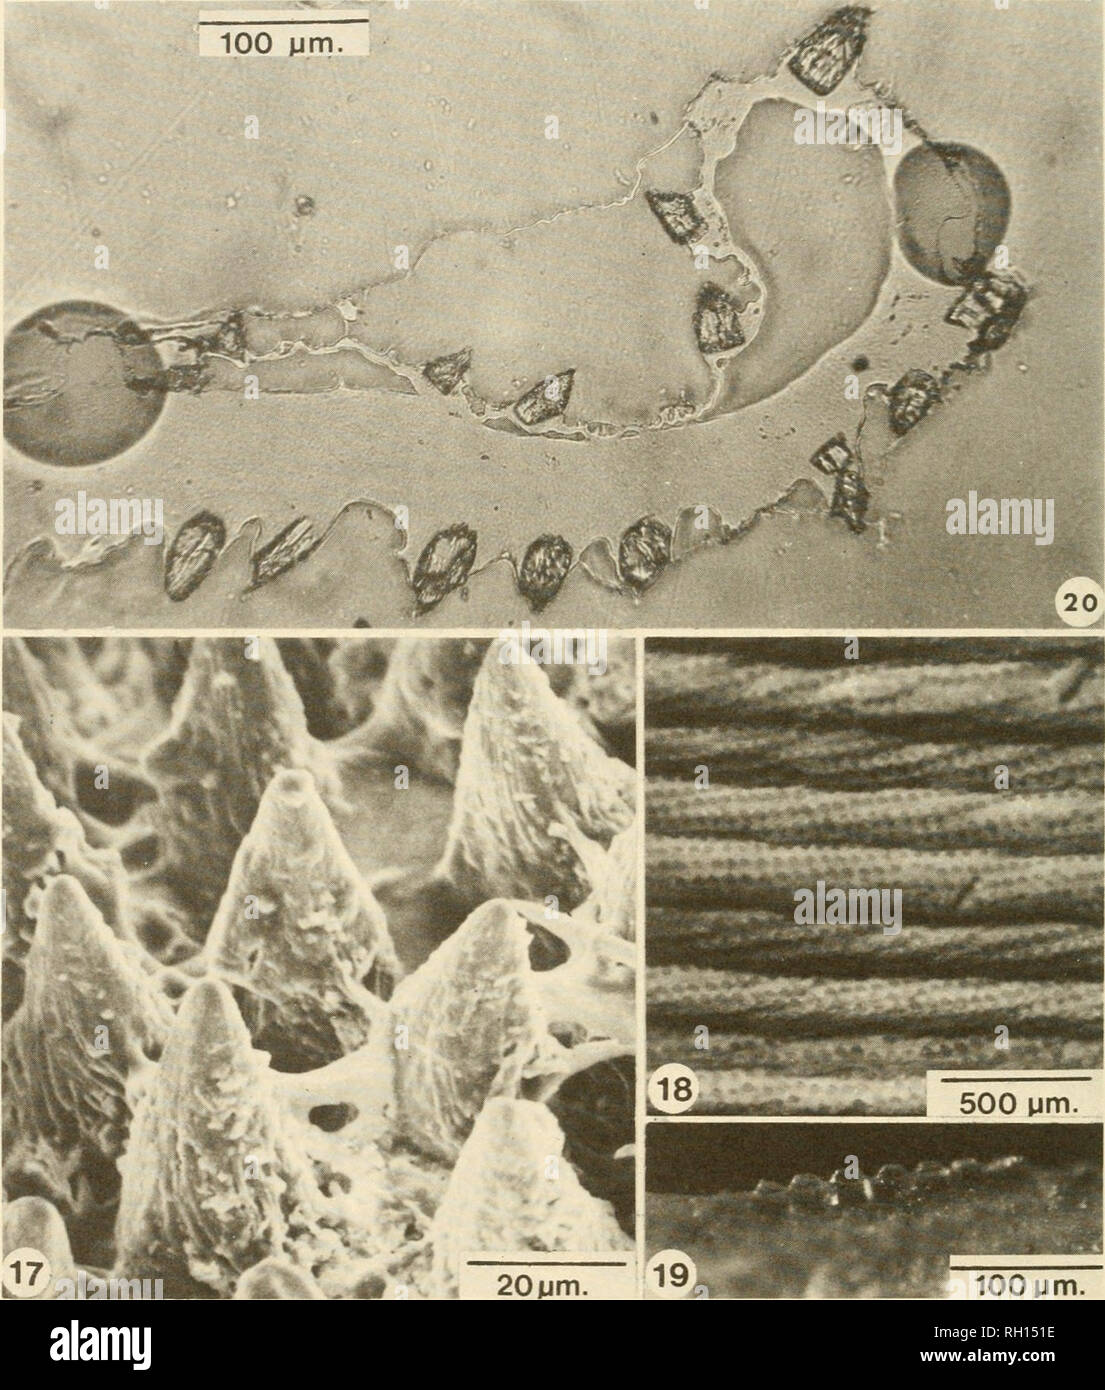 . Bulletin. Natural history; Natuurlijke historie. 32 PEABODY MUSEUM BULLETIN 41. Fig. 17. Surface of the posterior periostracum in Spengleria rostrata; scanning electron micrograph. Rodlike structure on the right is a sponge spicule. Fig. 18. Abraded tips of aragonitic periostracal spikes on the sides of the shell in the anterior of Spengleria rostrata. Note the alignment of the spikes in rows oblique to the larger comarginal shell ridges. Fig. 19. Aragonitic periostracal spikes on the anteroventral shell margin oi Spengleria rostrata. Note the apical abrasion. Fig. 20. Acetate peel of a radi Stock Photo